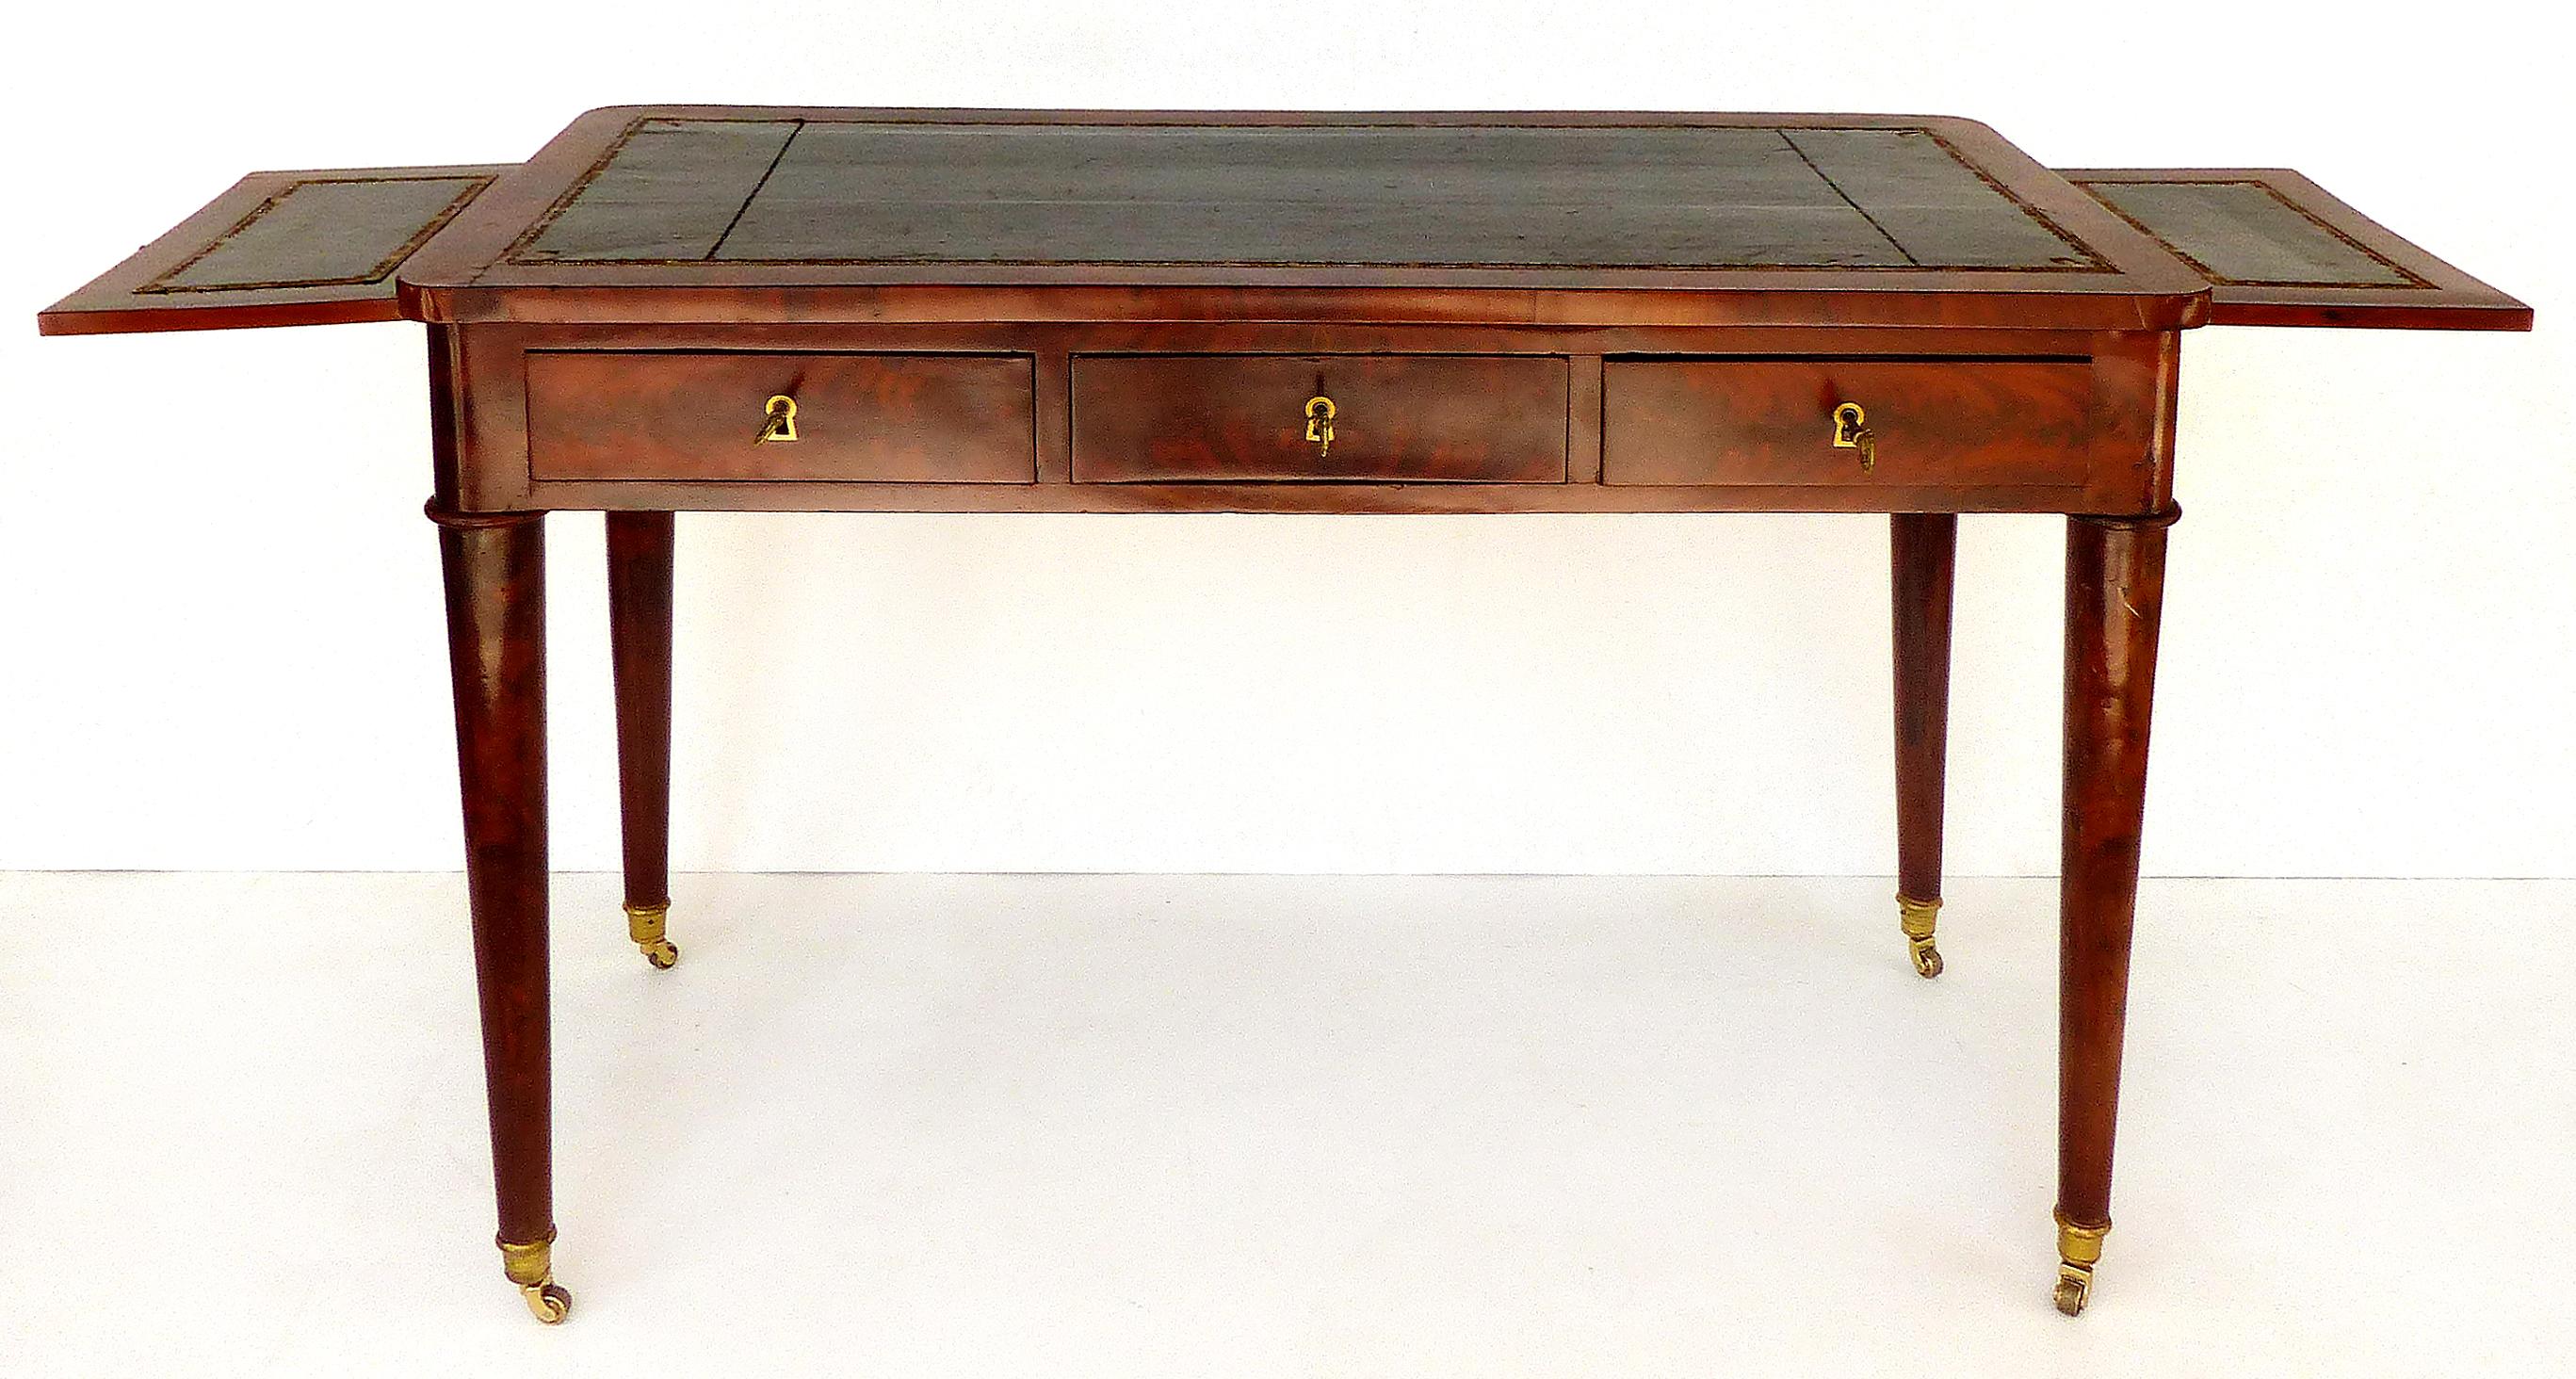 19th-Century Mahogany Writing Desk with Tapering Legs and Embossed Leather Top

Offered for sale is a fine 19th-century flame mahogany three drawer writing desk with a black embossed leather top and surface extensions. The four conical tapering legs